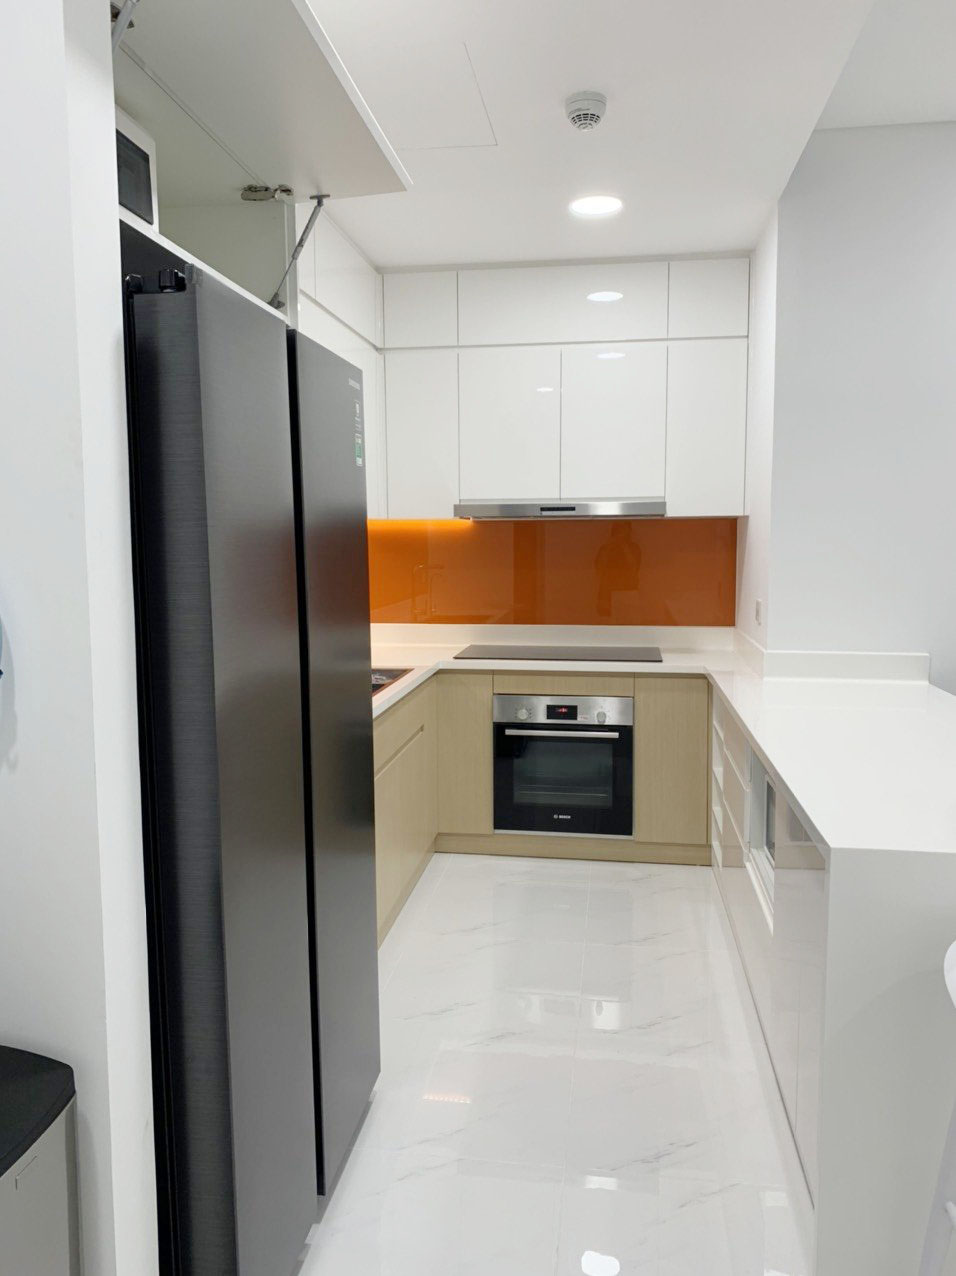 For rent apartment 2 bedrooms, brand new furniture